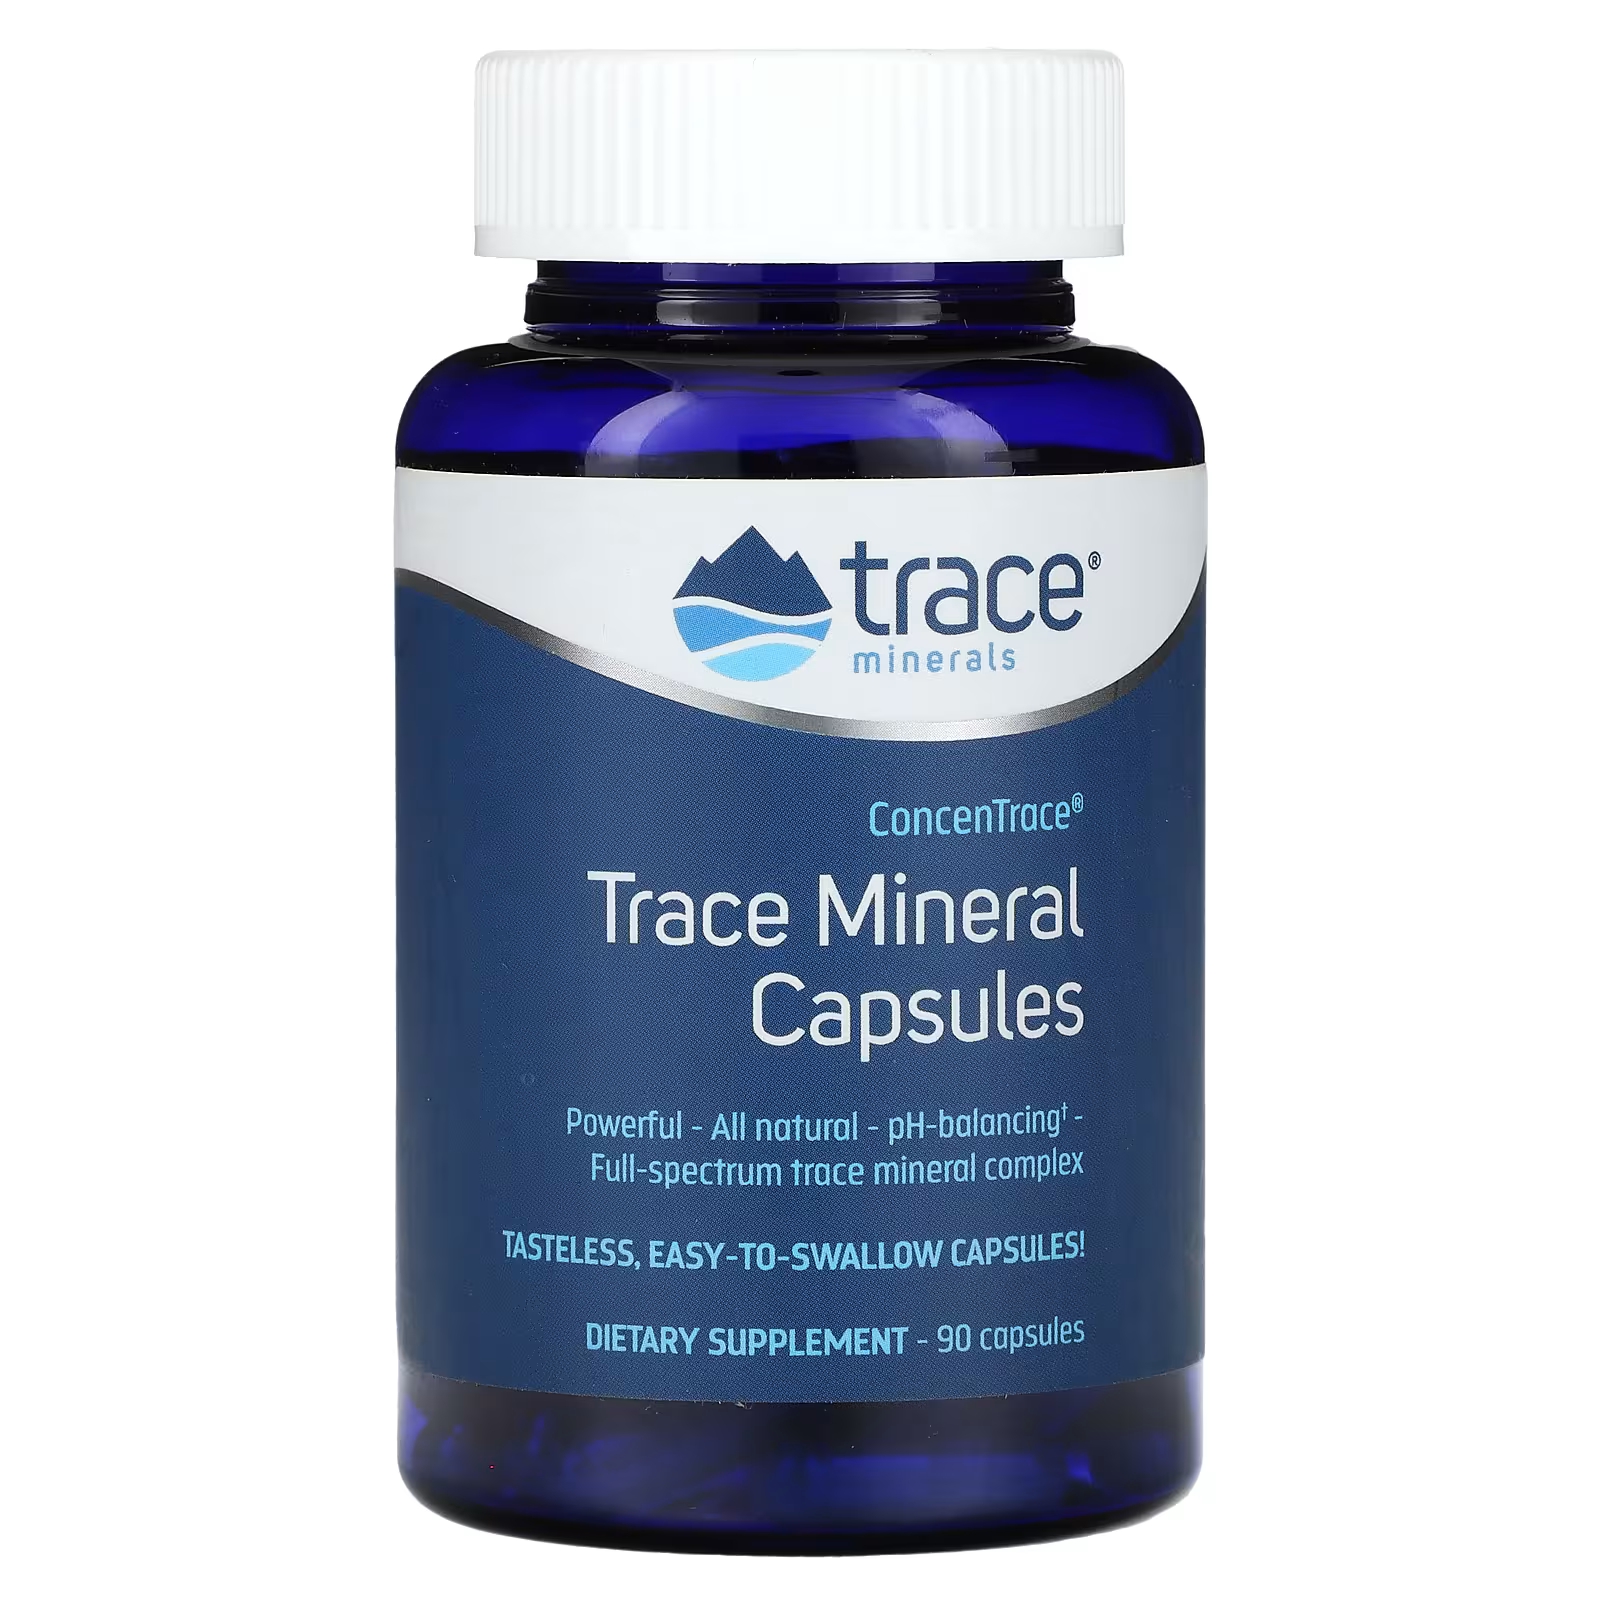 Пищевая добавка Trace Minerals ConcenTrace Trace Mineral Capsules, 90 капсул пищевая добавка trace minerals concentrace trace mineral drops 237 мл